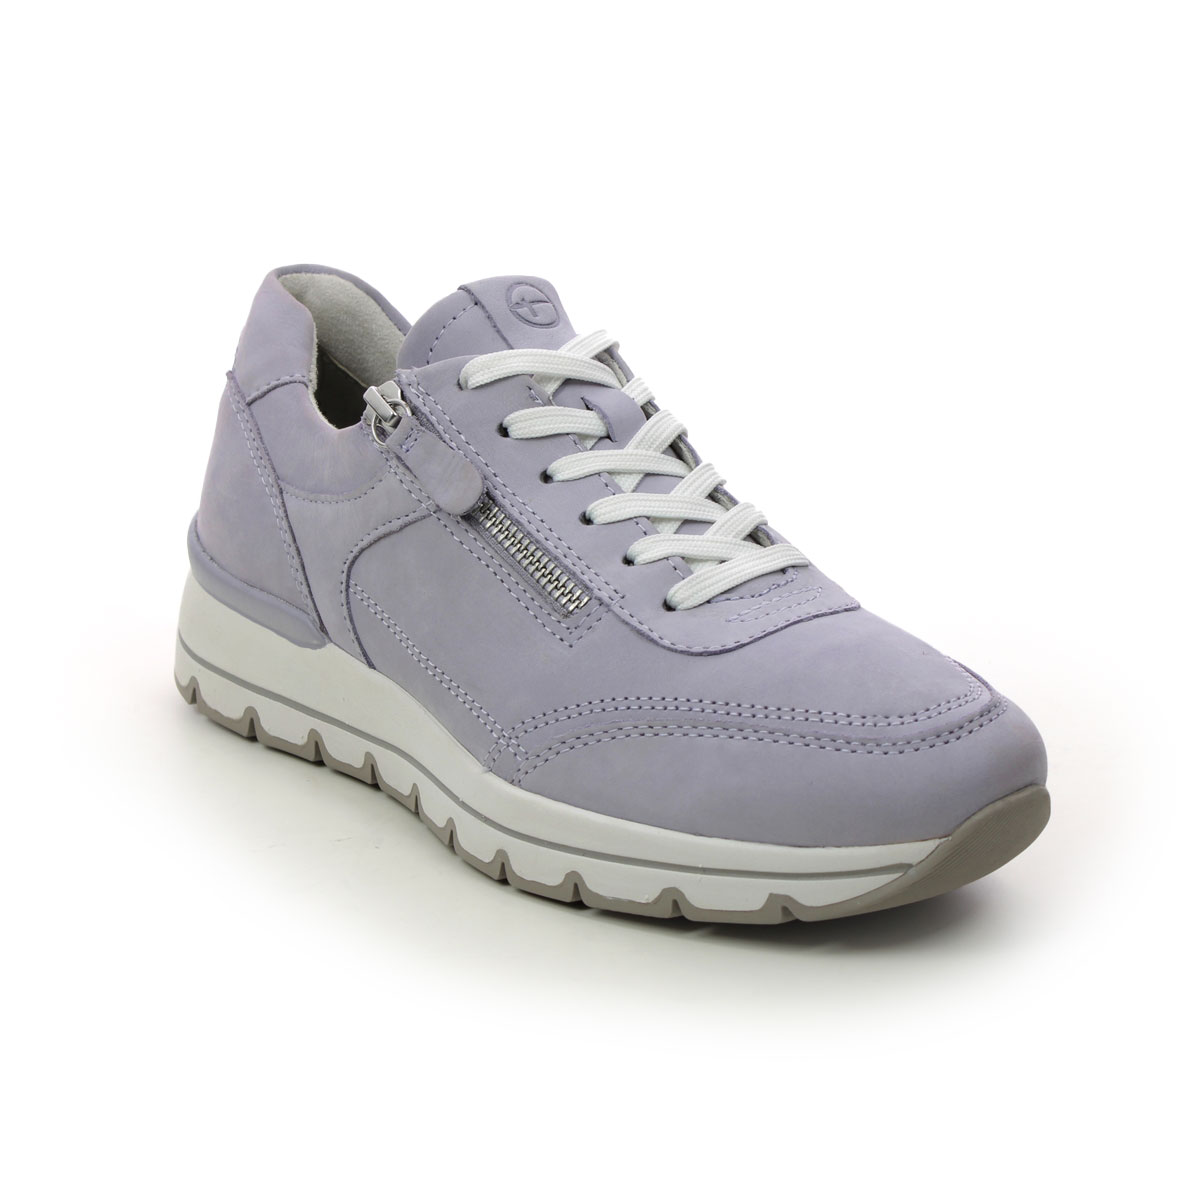 Tamaris Vinnie Zip Lilac Womens Trainers 23725-30-543 In Size 38 In Plain Lilac